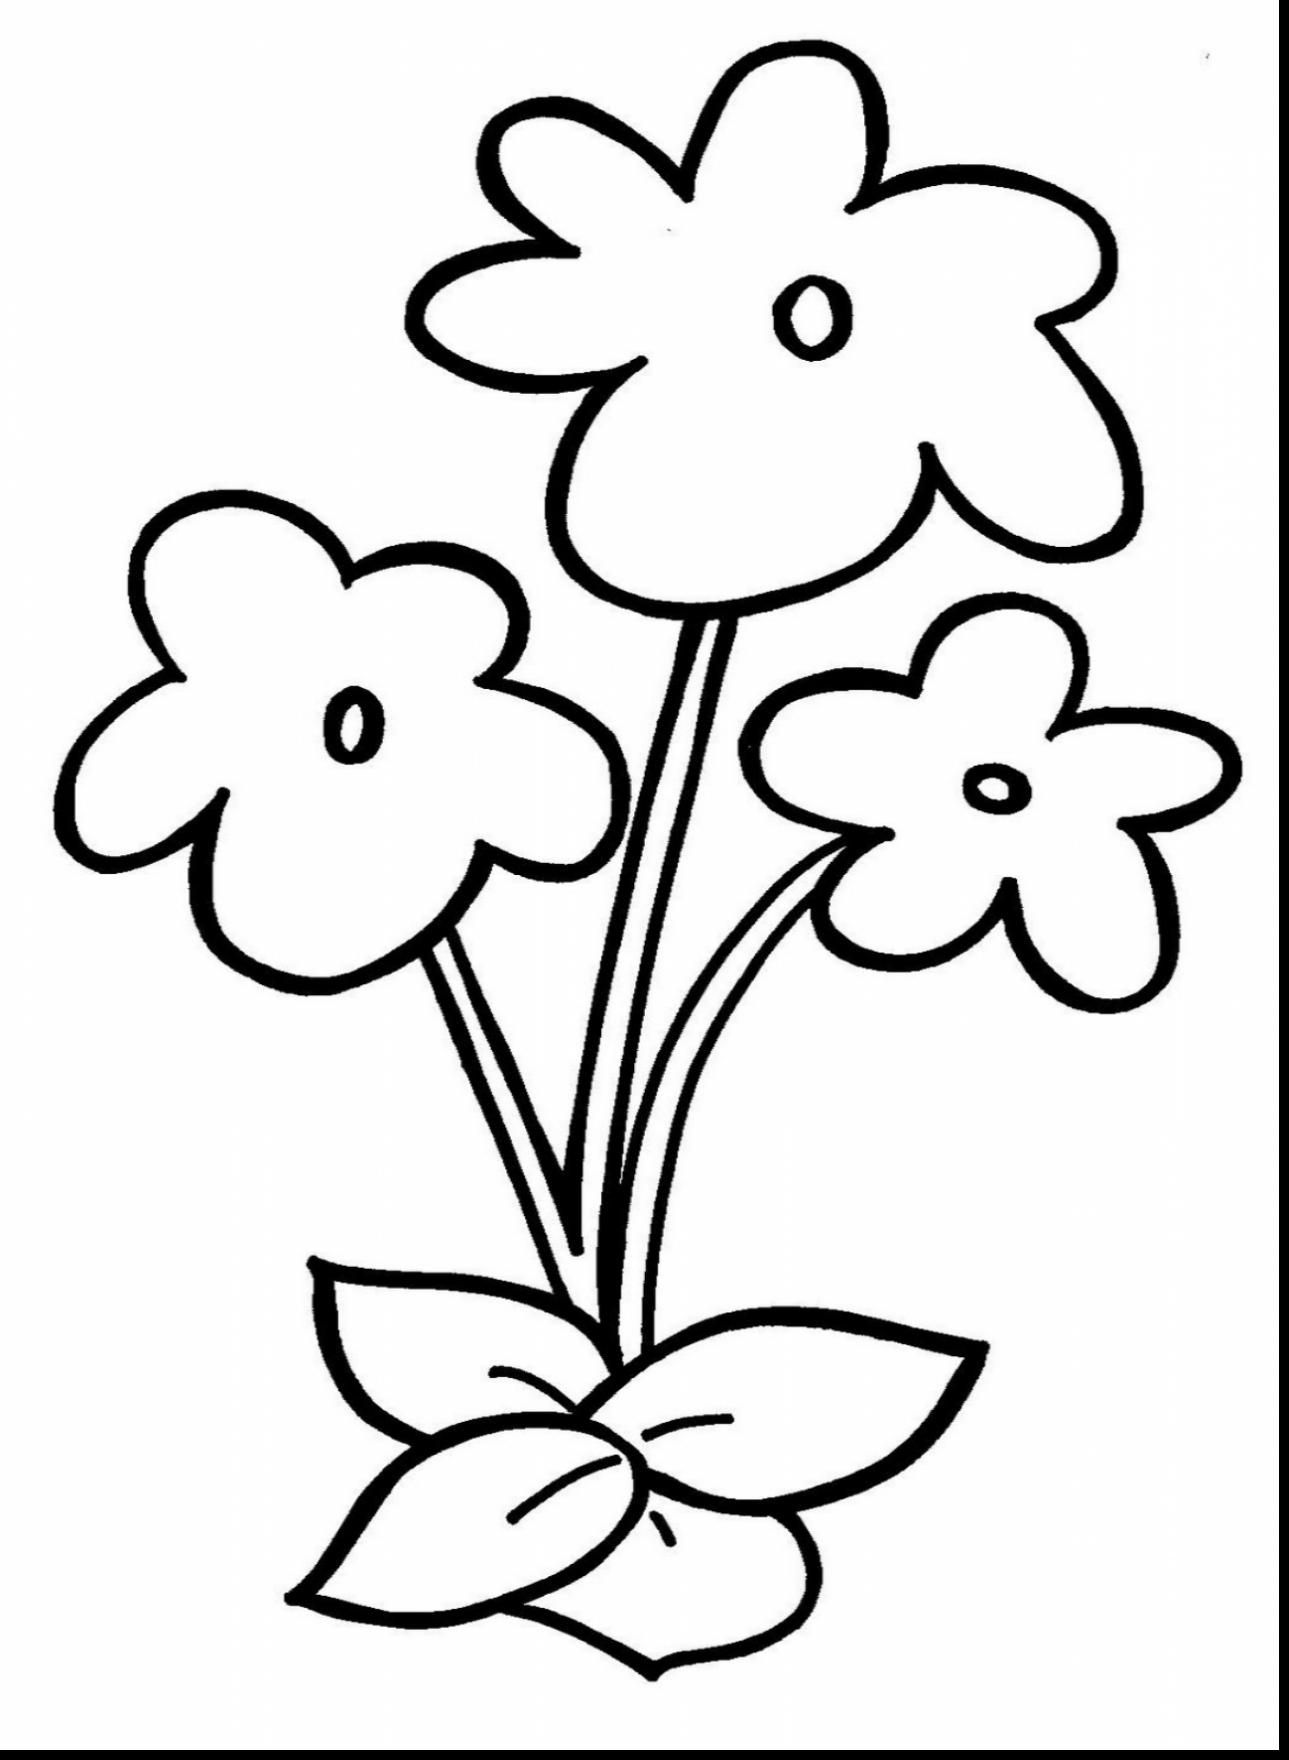 Small Flower Coloring Pages At GetColorings Free Printable Colorings Pages To Print And Color